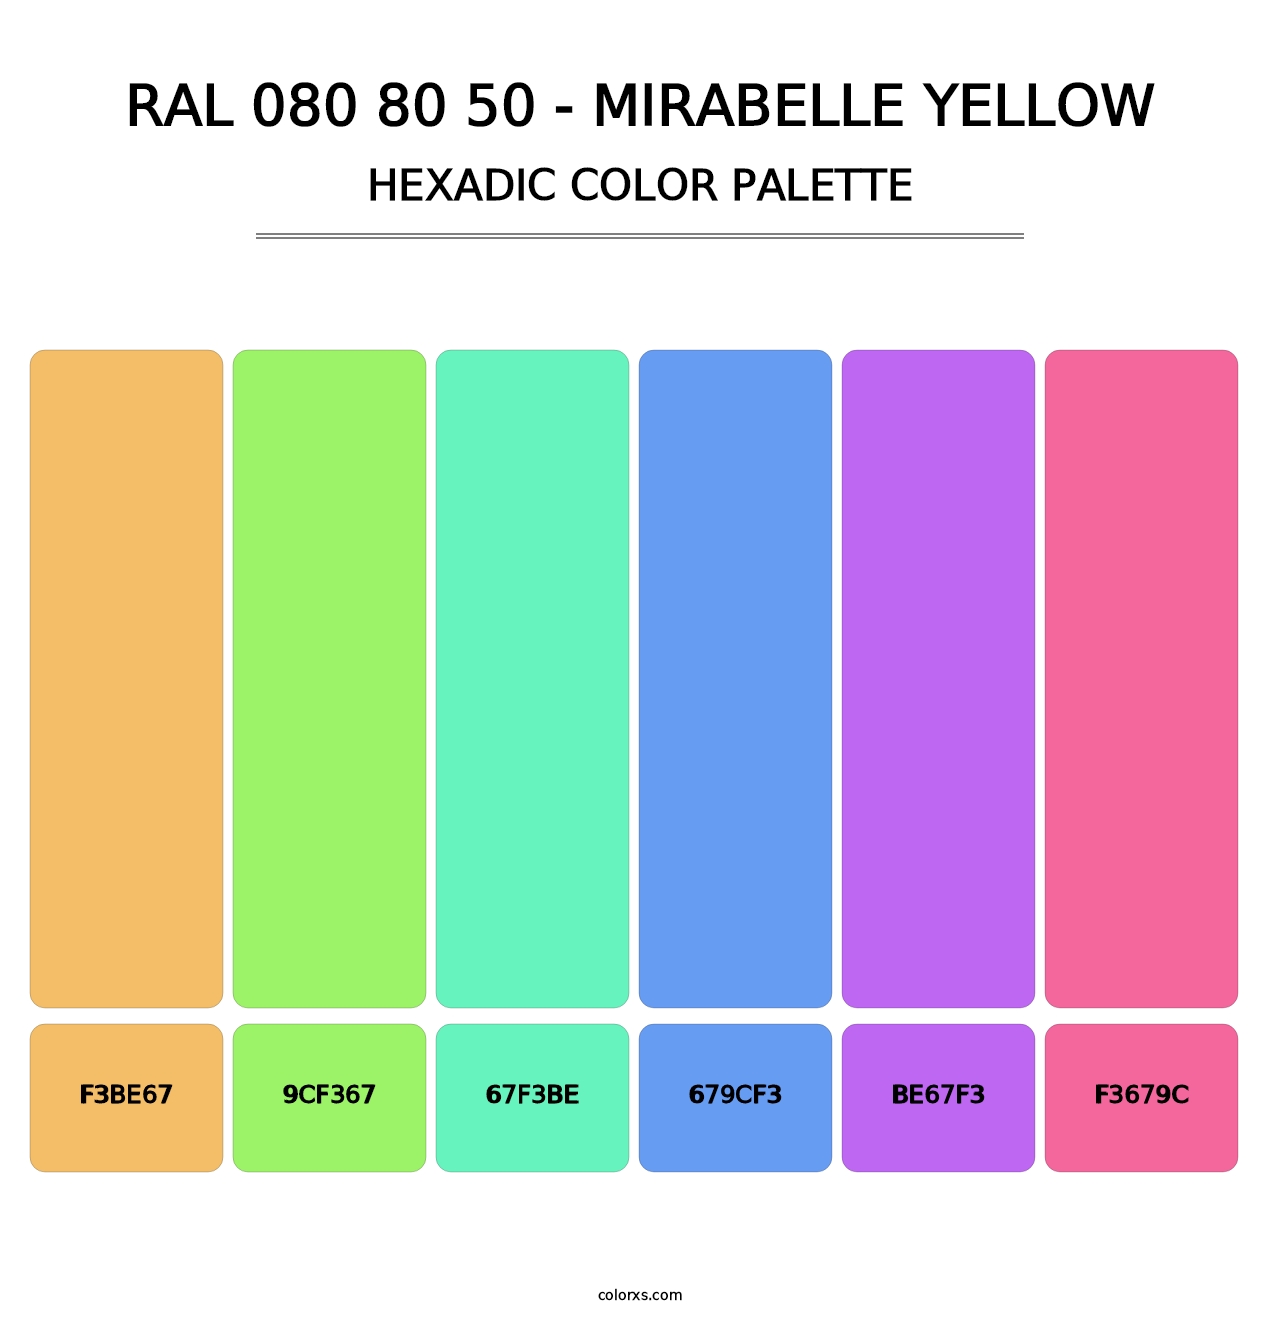 RAL 080 80 50 - Mirabelle Yellow - Hexadic Color Palette